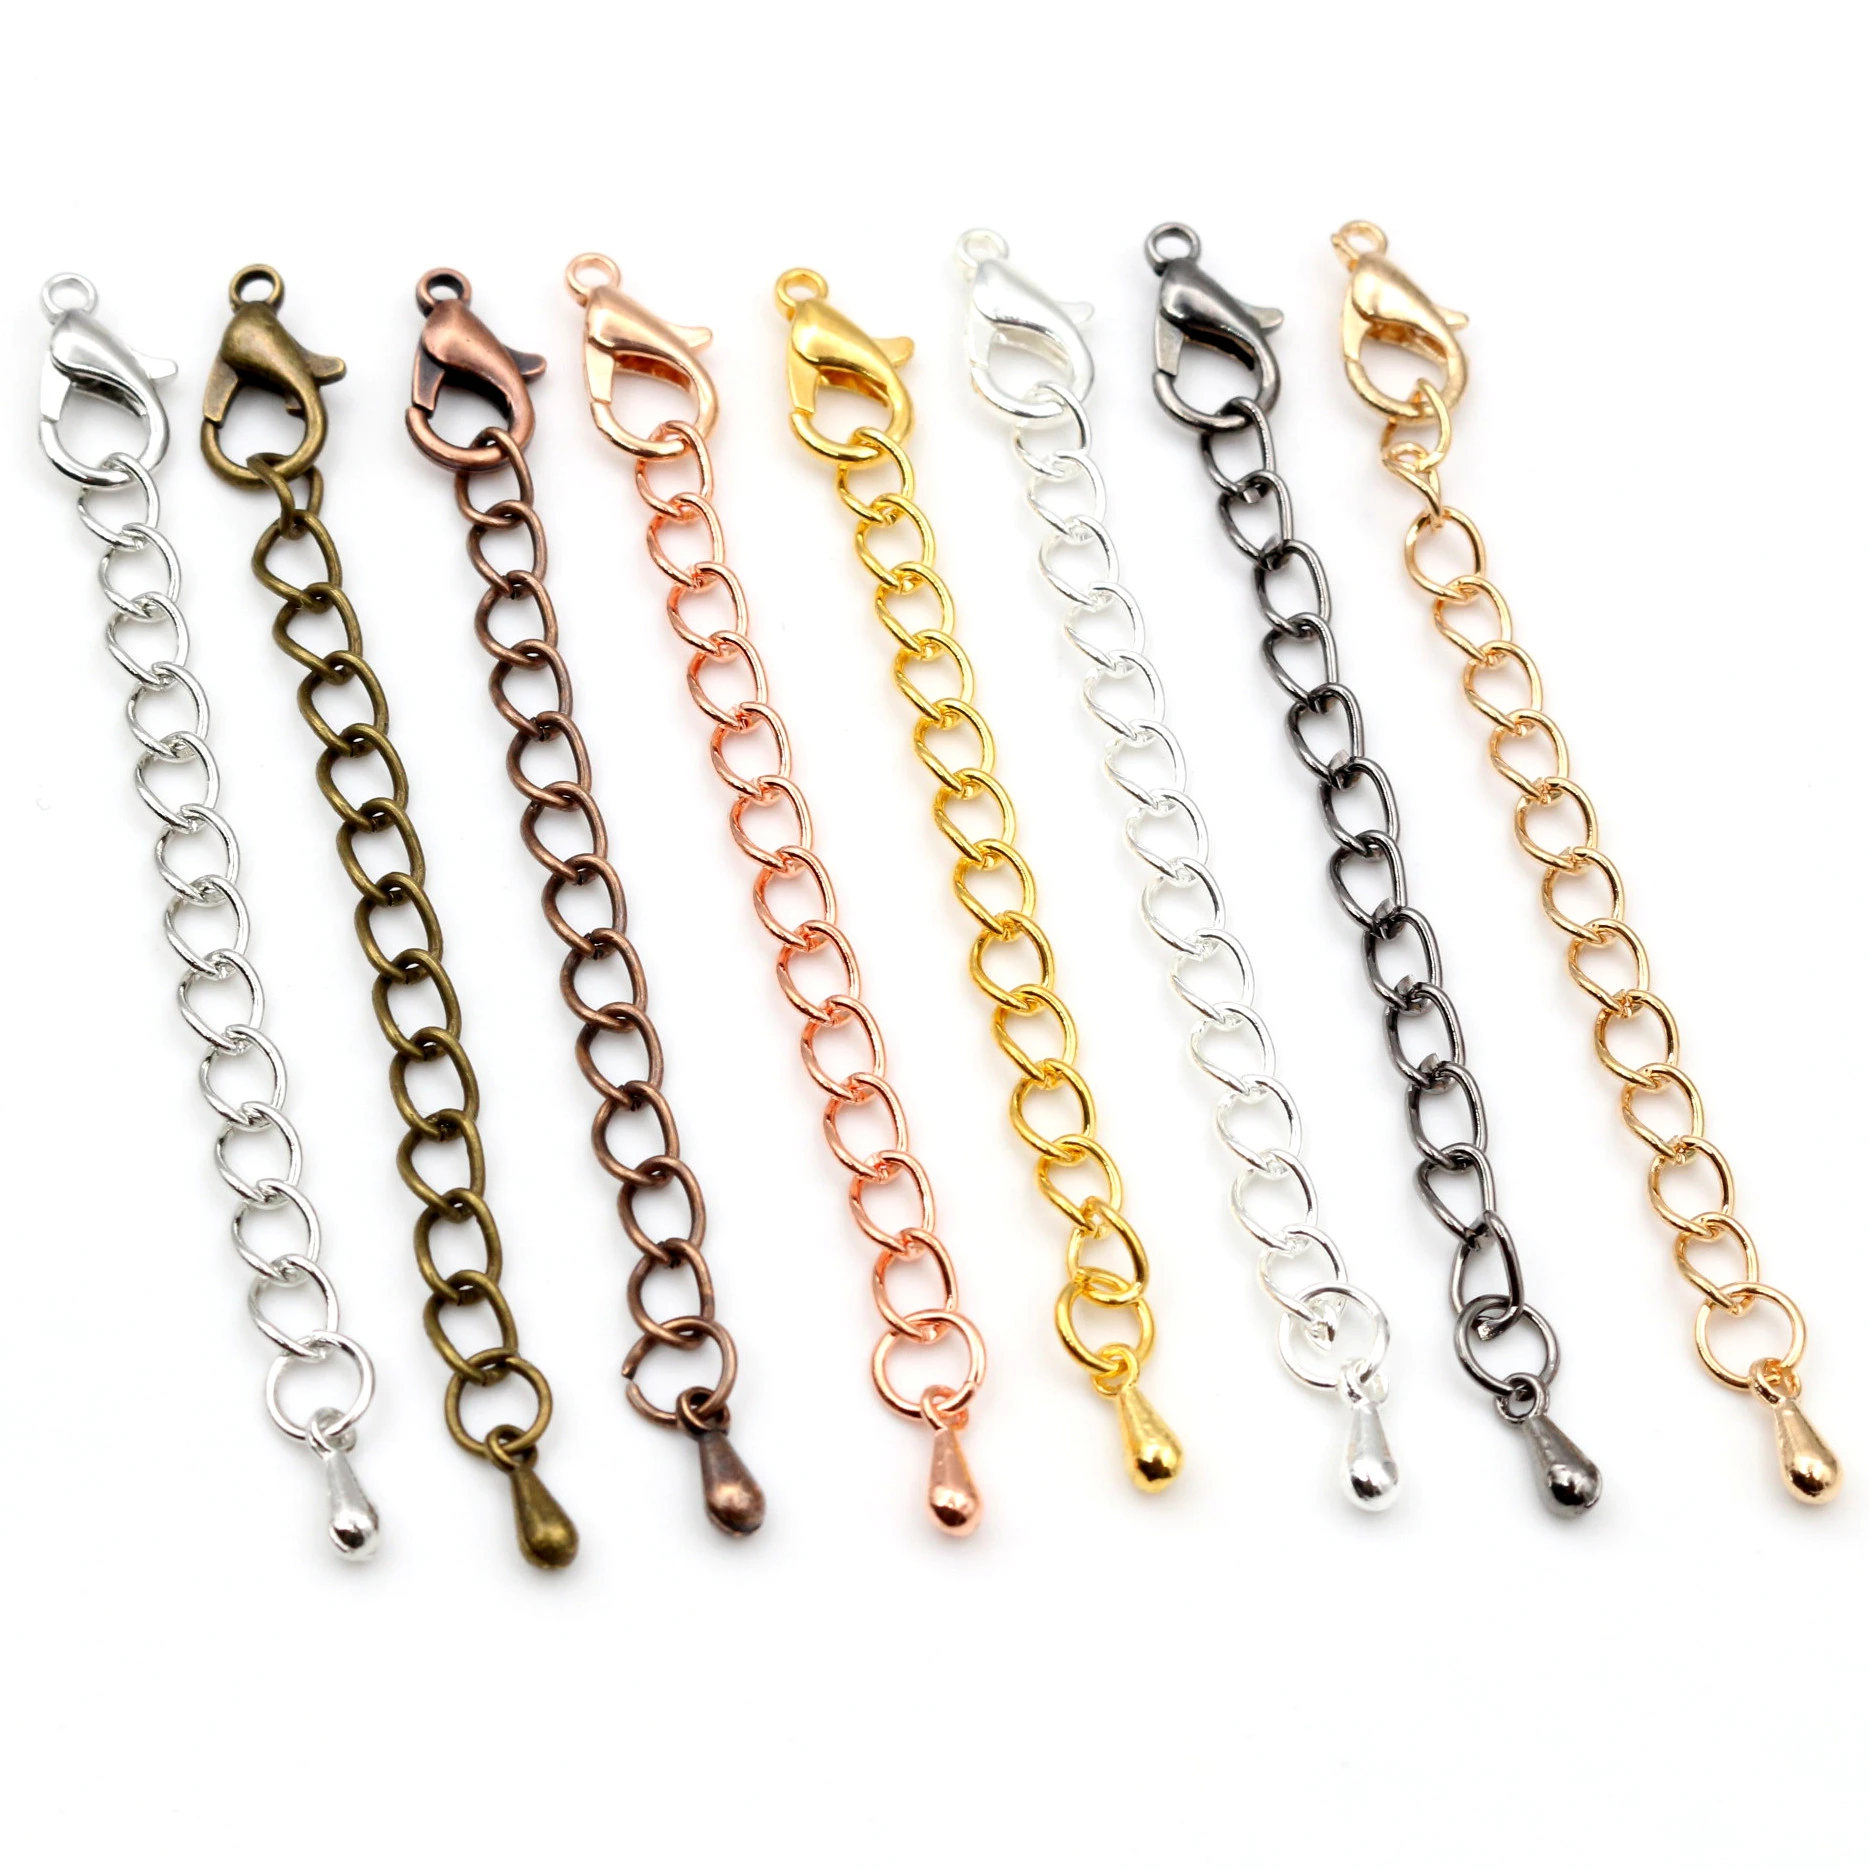 10pcs/lot 50 70mm Tone Extended Extension Tail Chain Lobster Clasps Connector For DIY Jewelry Making Findings Bracelet Necklace